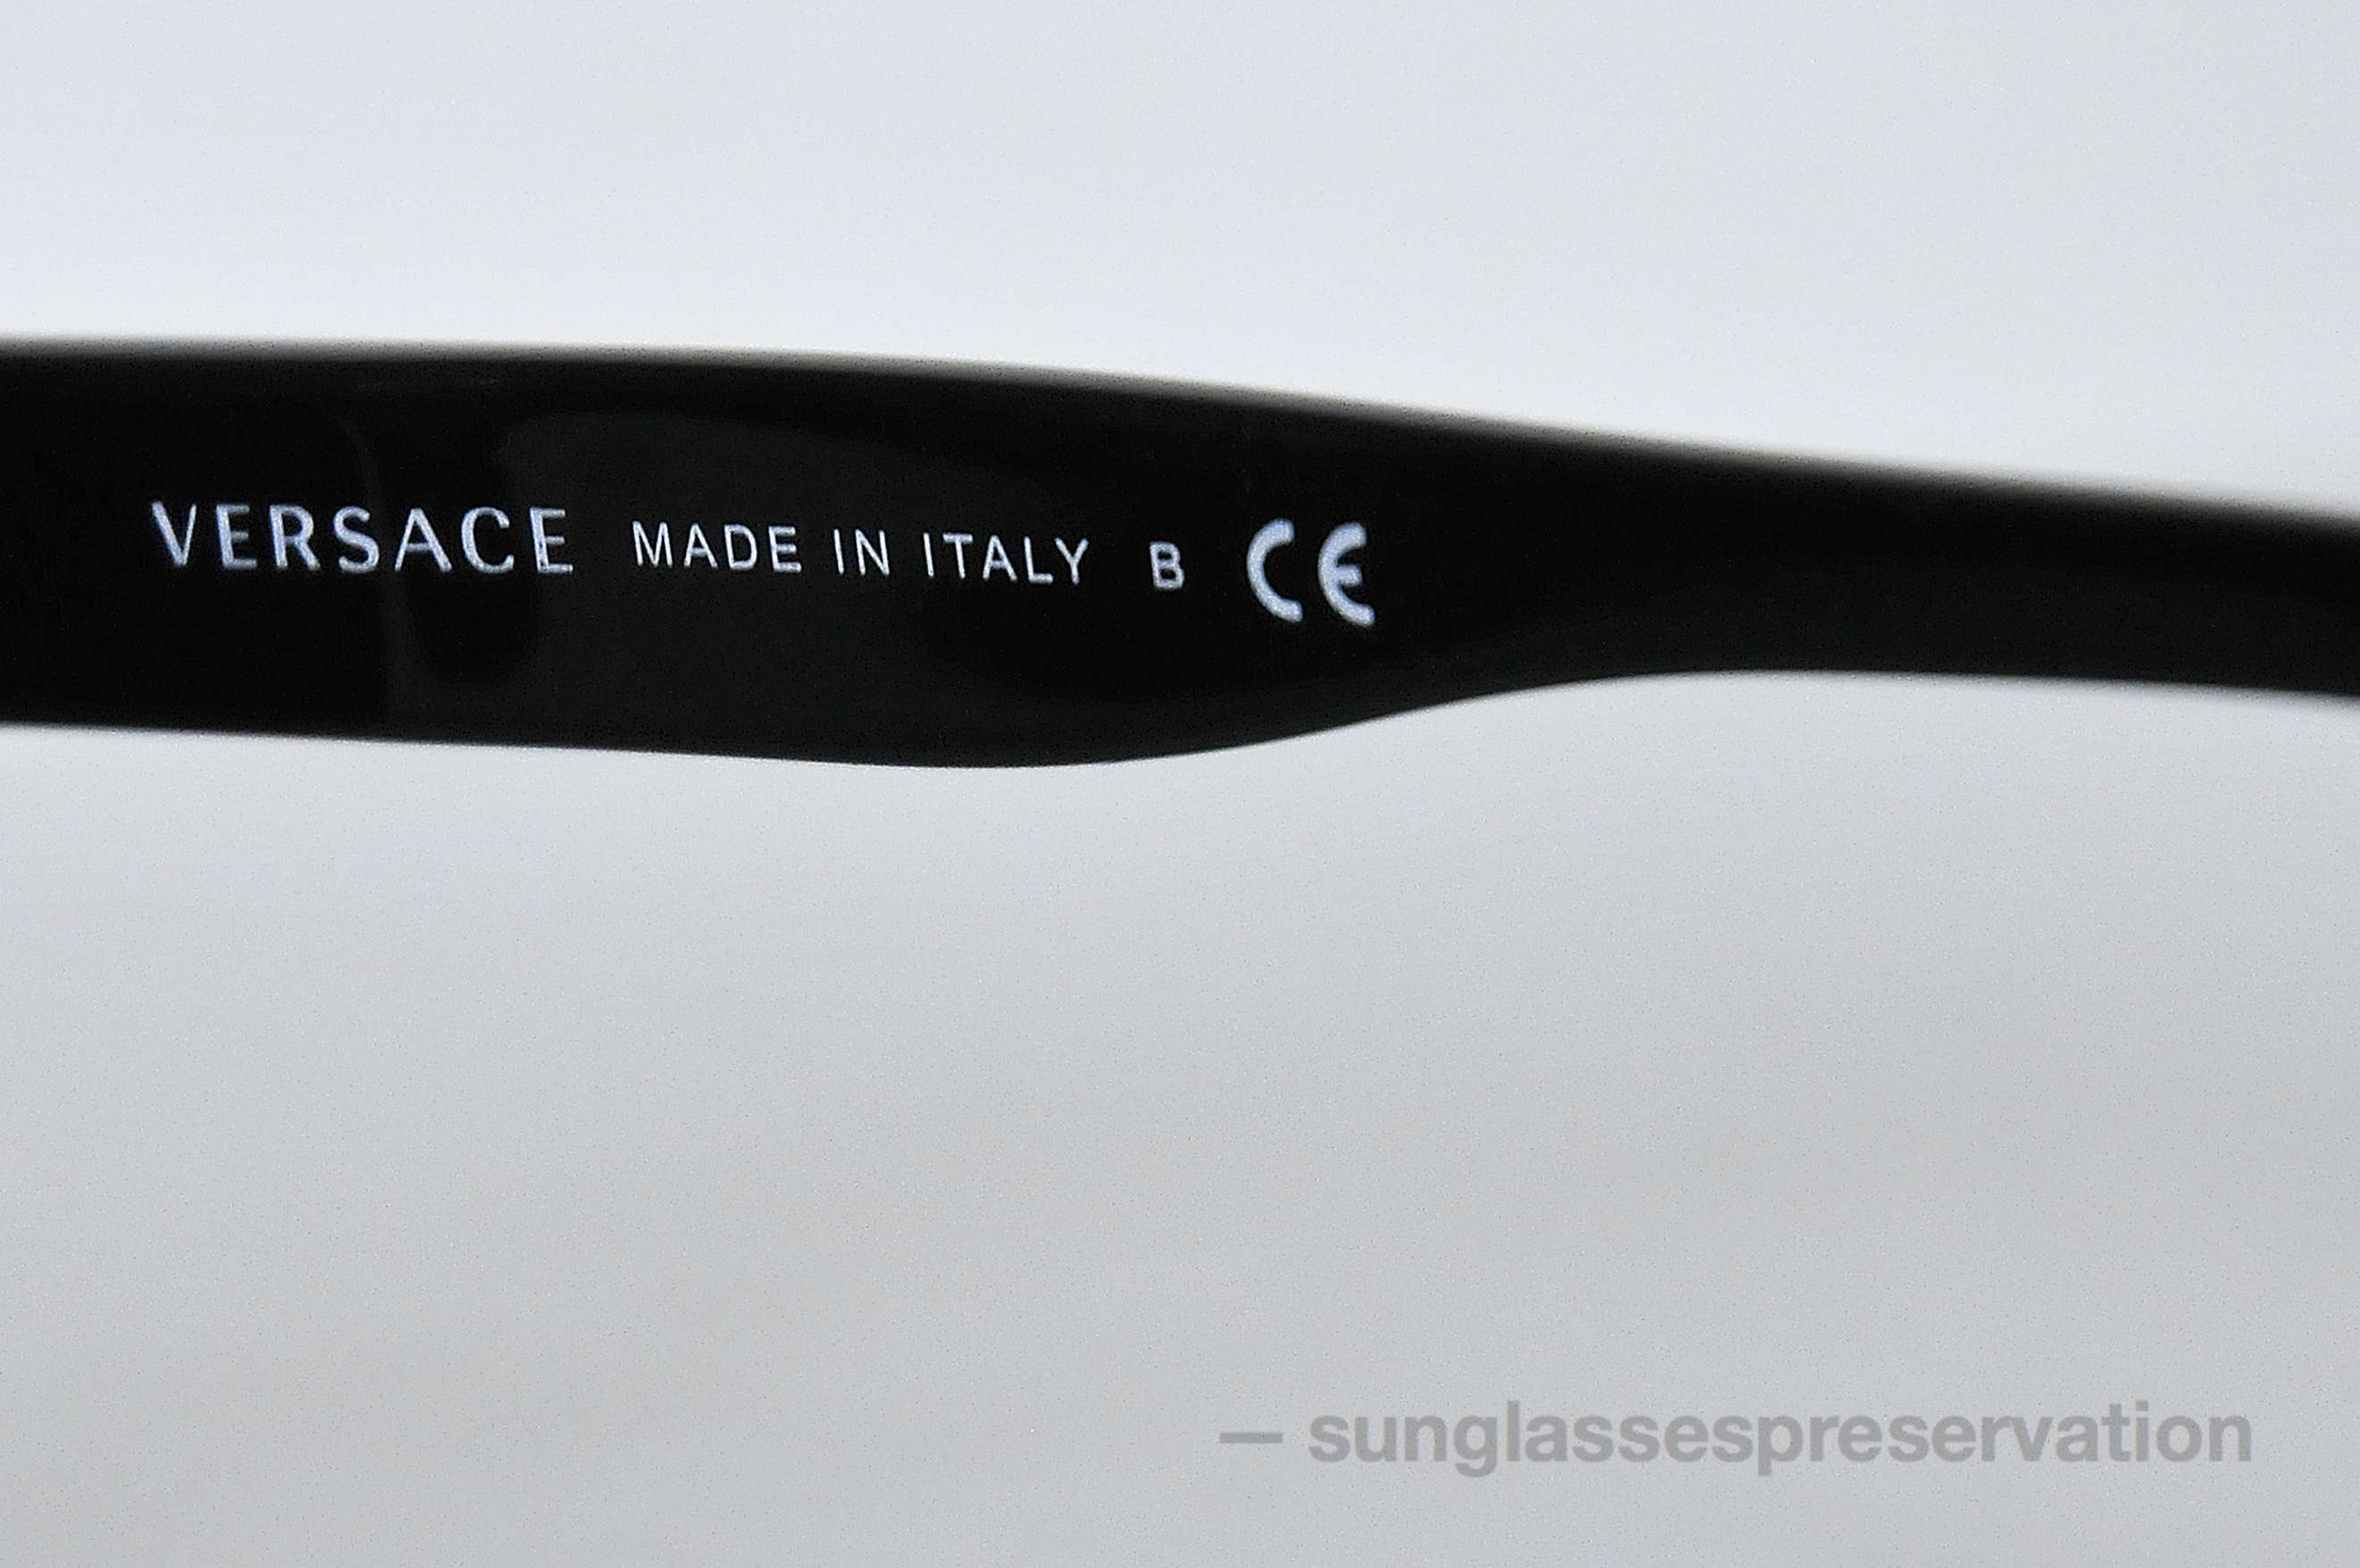 Versace sunglasses 2012 limited edition